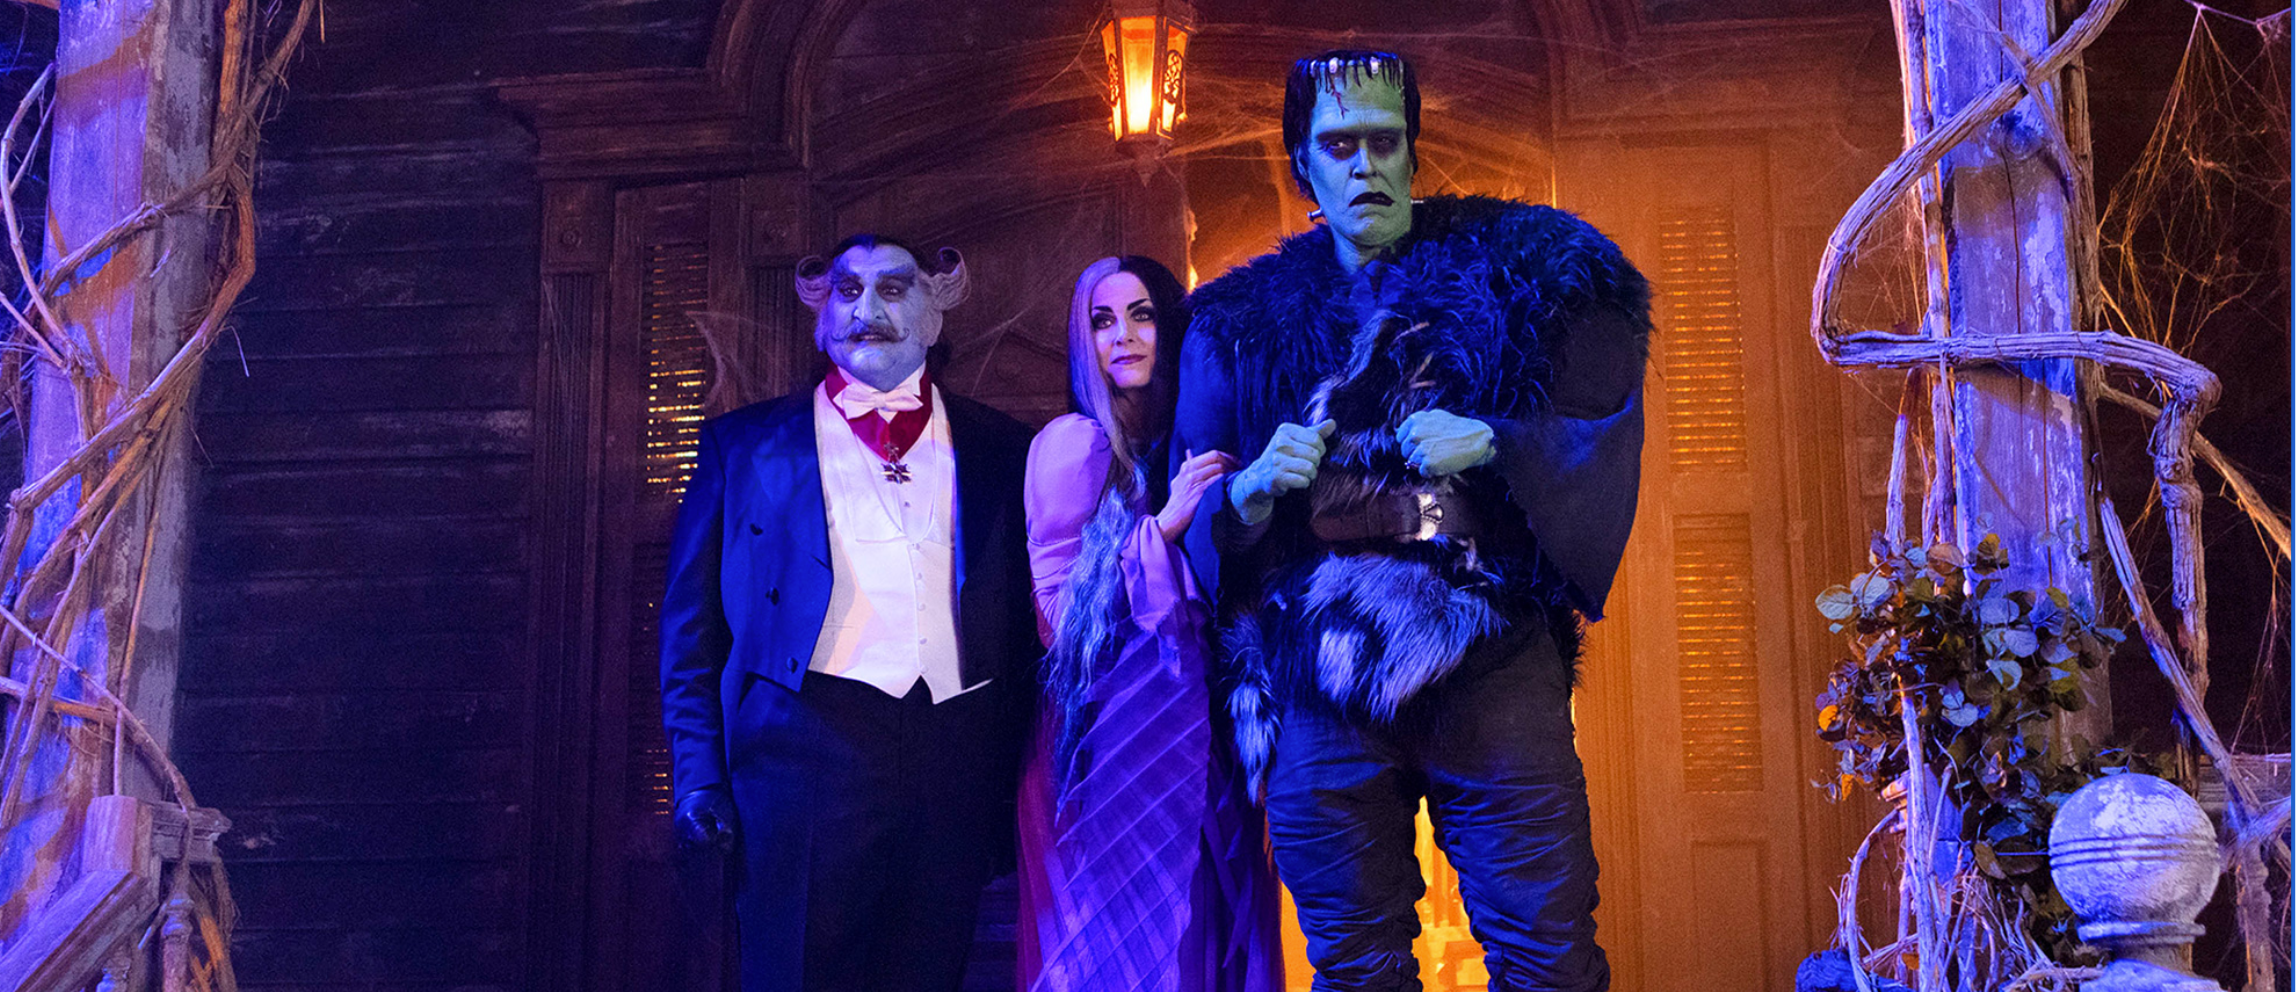 Munsters Color rob zombie